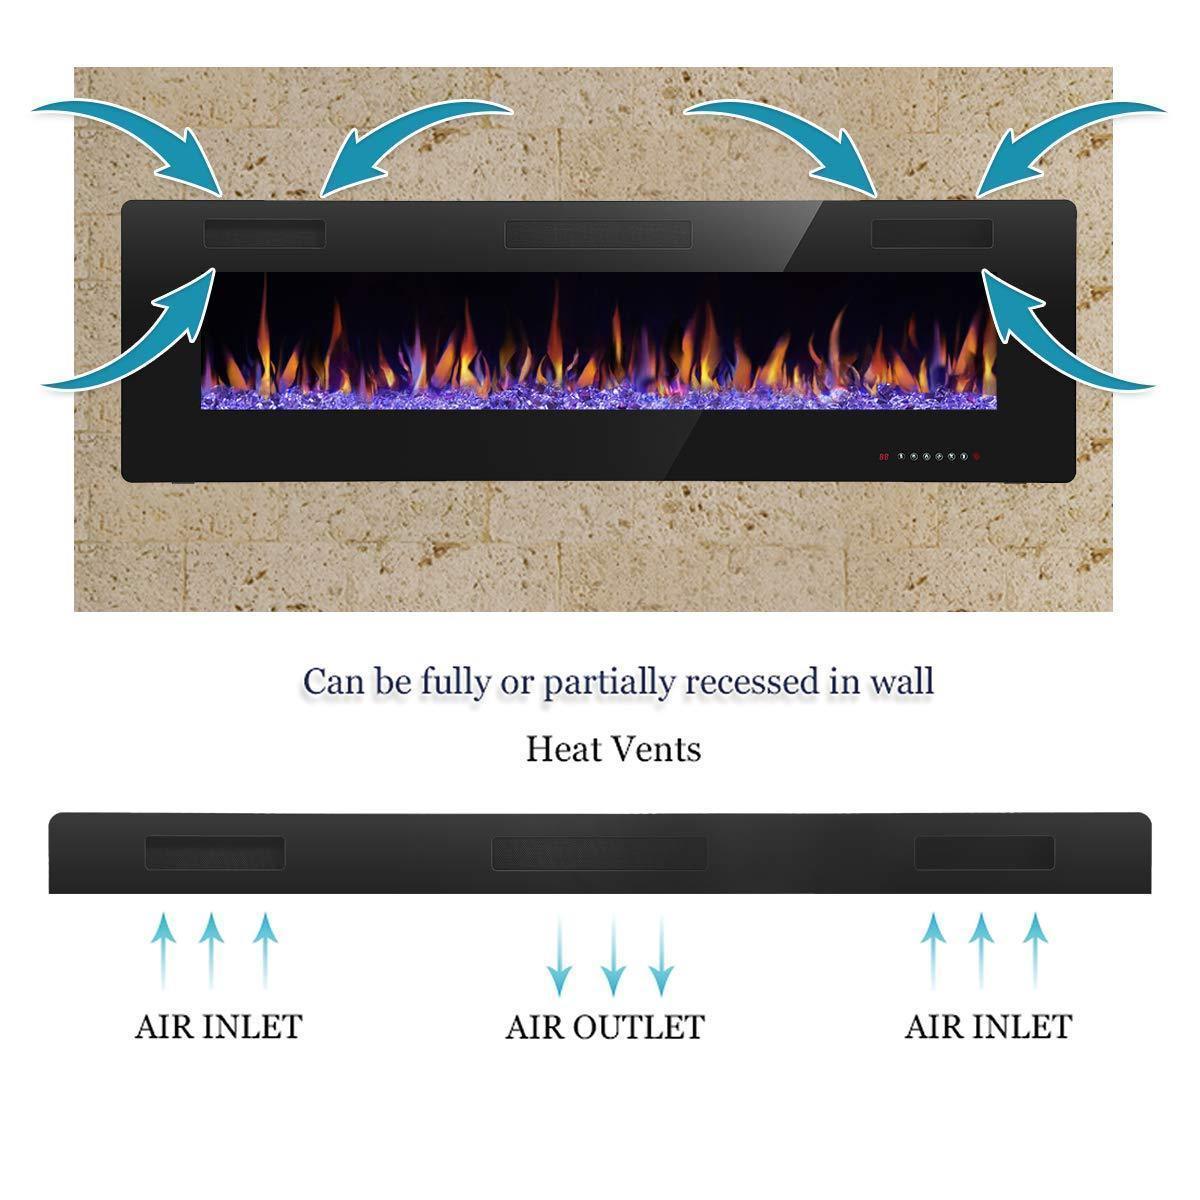 RW Flame 868C 750W-1500W 68 Inch Recessed and Wall Mounted Electric Fireplace With Remote Control Black New